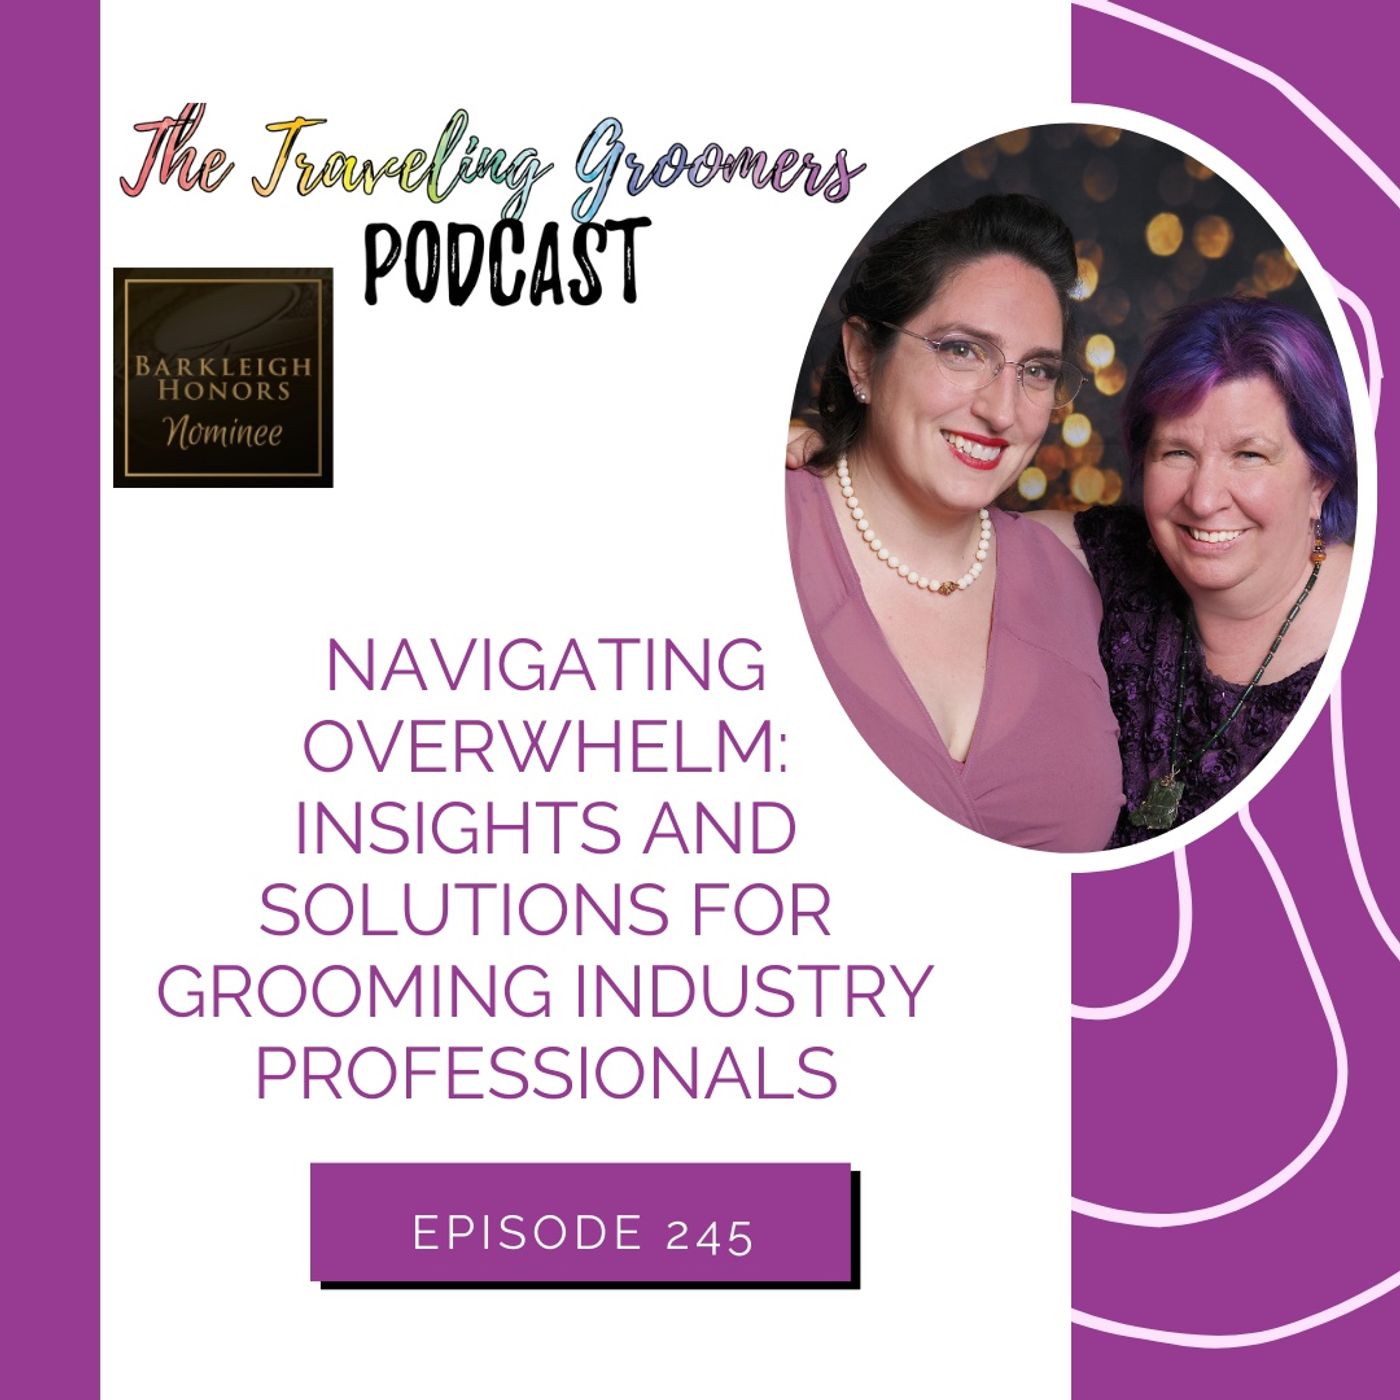 Navigating Overwhelm Insights and Solutions for Grooming Industry Professionals